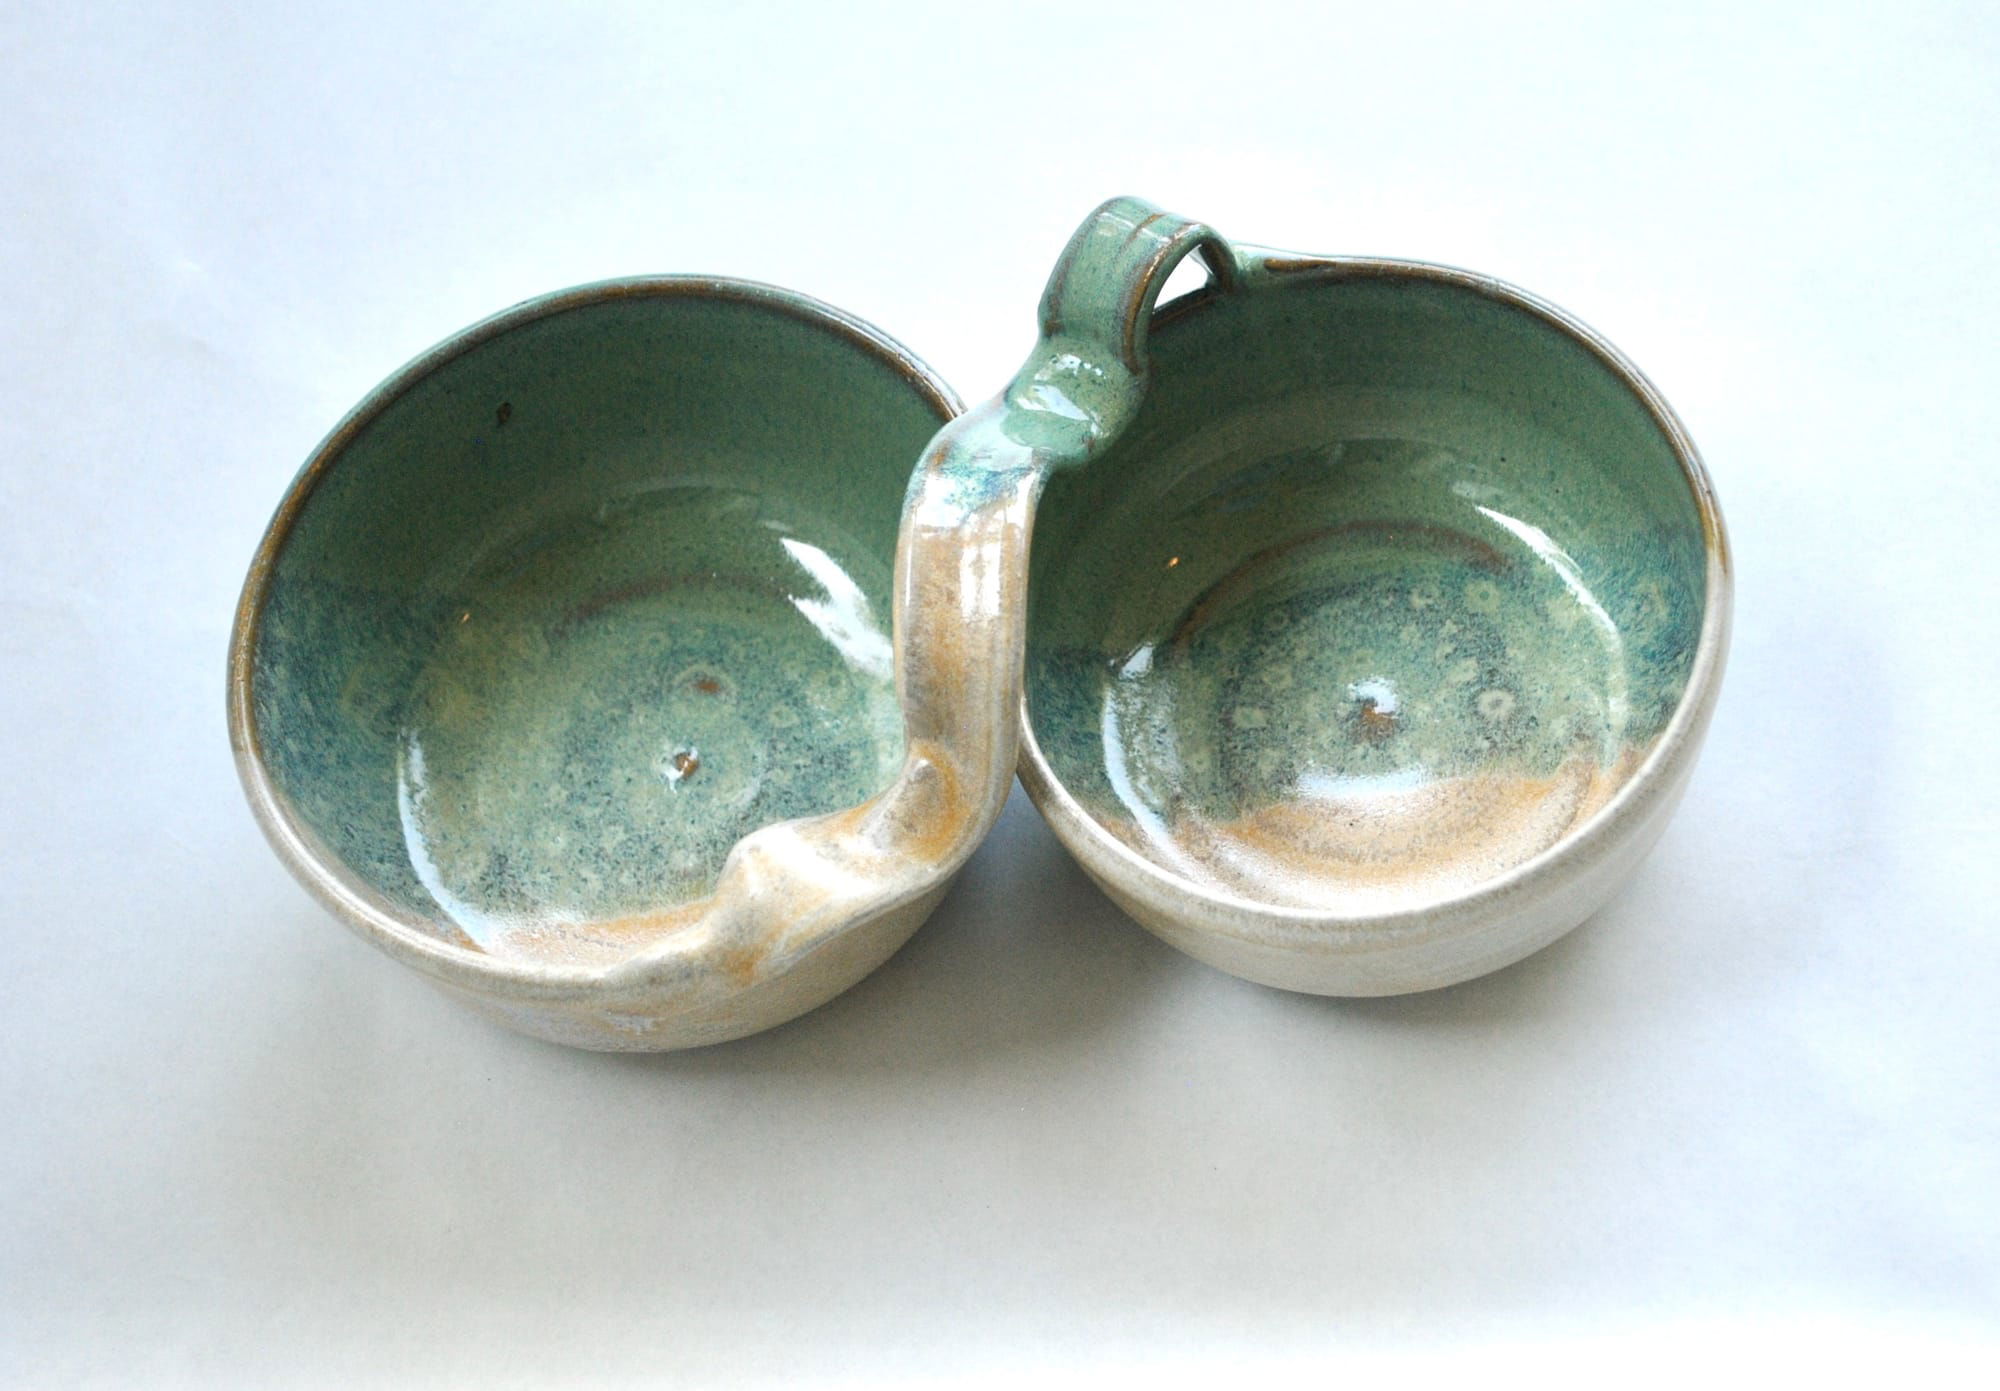 Teal and Creme Double Bowl Server with Handle